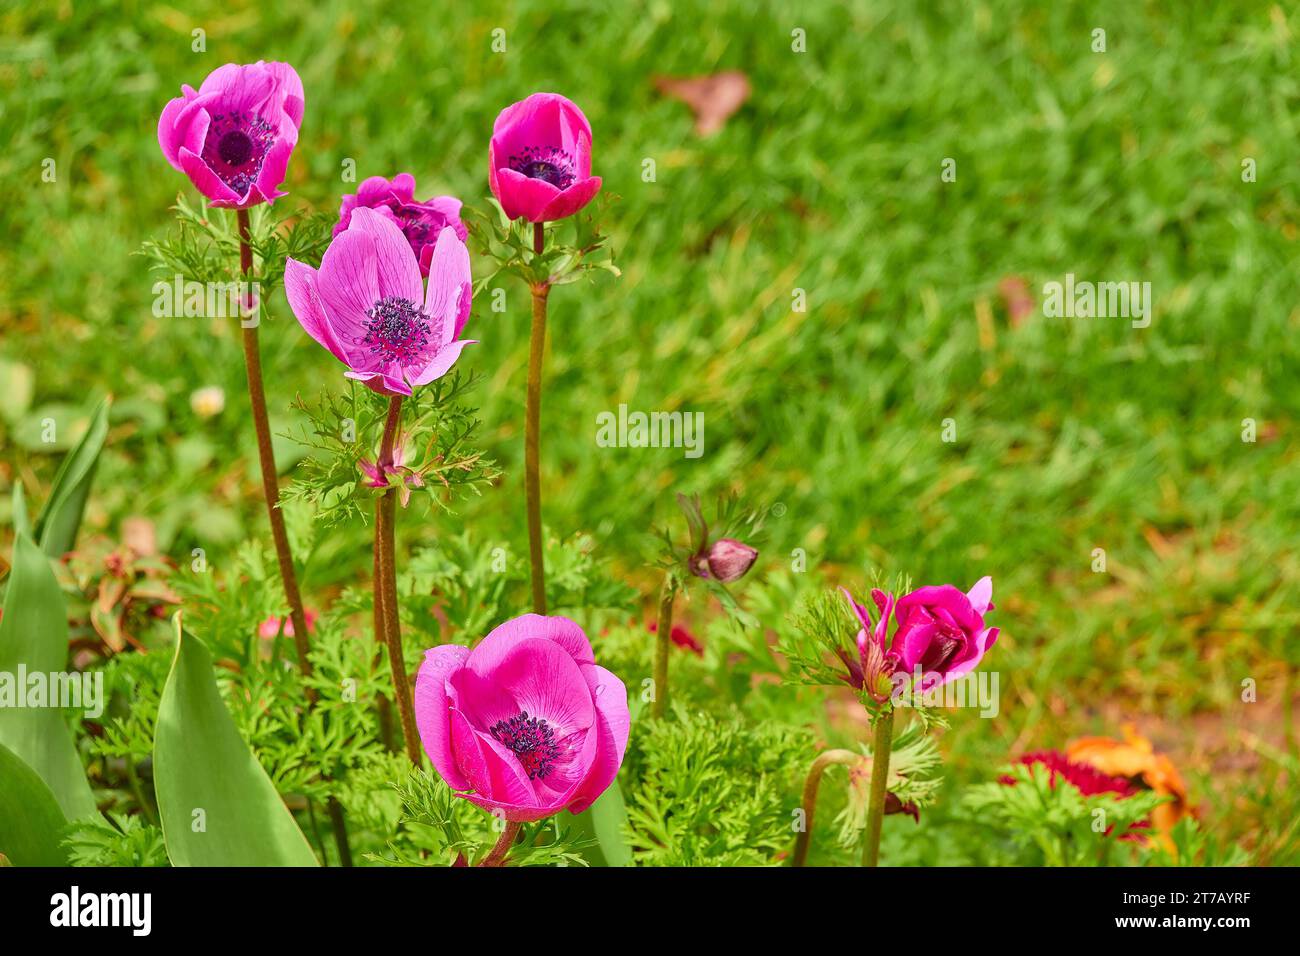 Anemone coronaria, the poppy anemone, Spanish marigold, or windflower, is a species of flowering plant in the genus Anemone, native to the Mediterrane Stock Photo